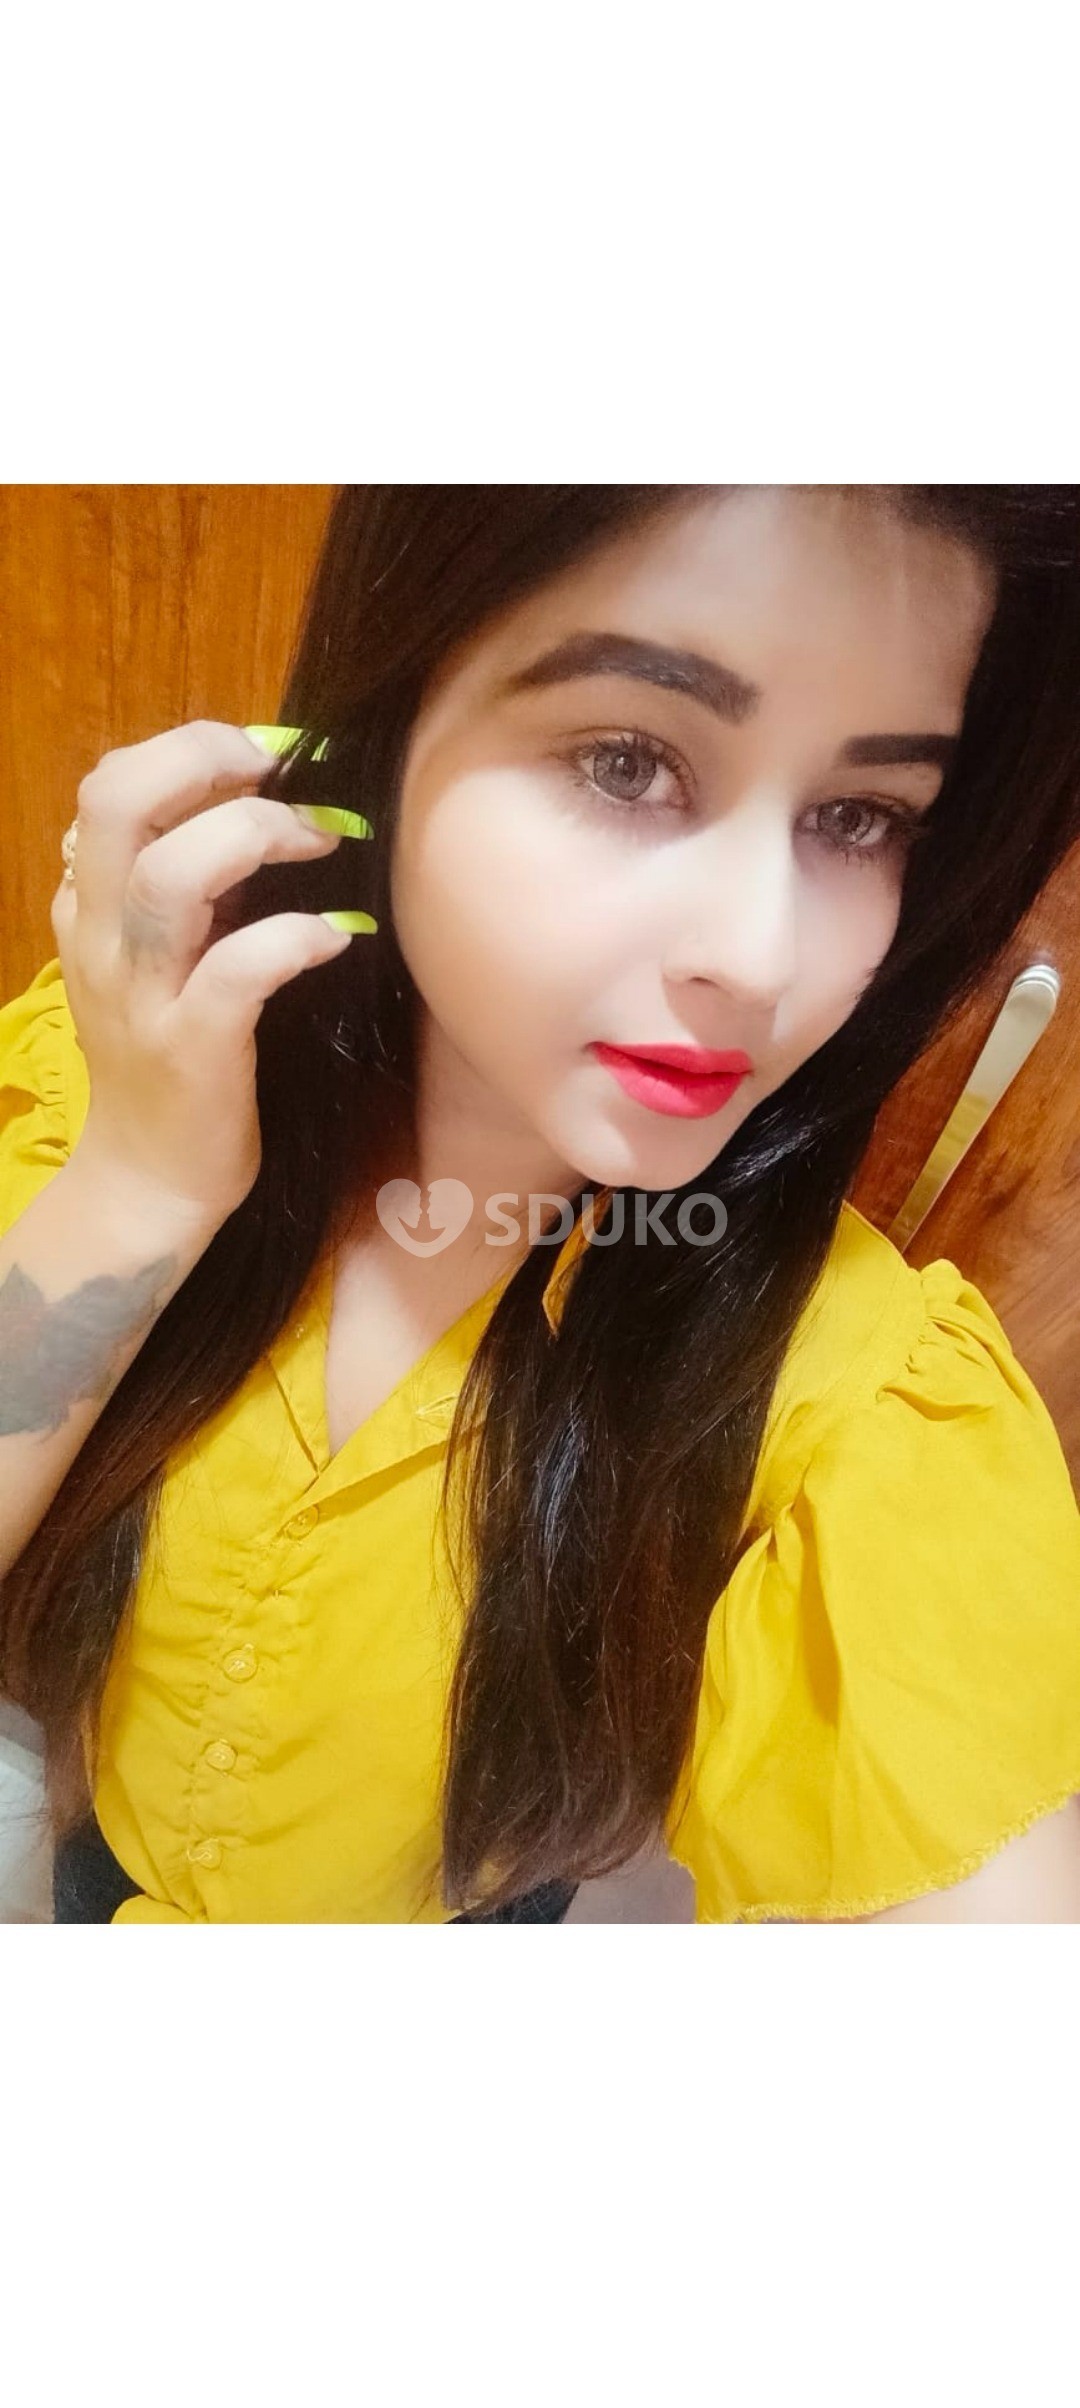 Jaipur ❣️🔜🥰 100% GENUINE  VIP 🔝👩✅ CALL GIRL SERVICE IN 24HOUR AVAILABLE SERVICE,,,,,